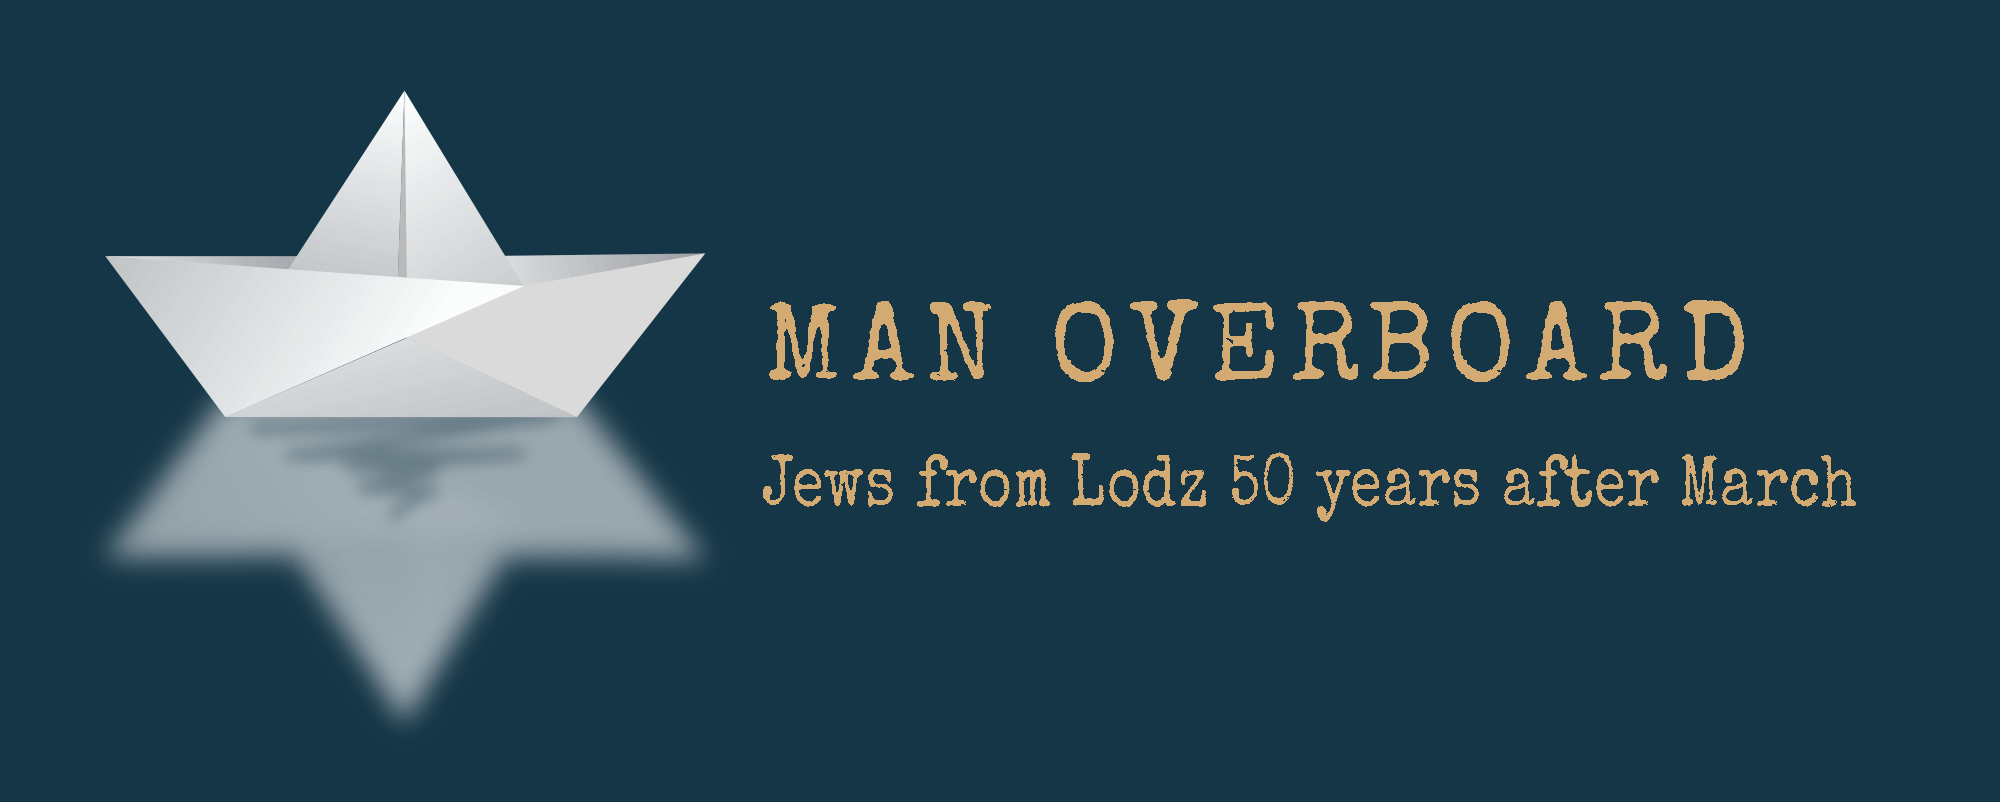 Man Overboard - Jews from Lodz 50 years after March